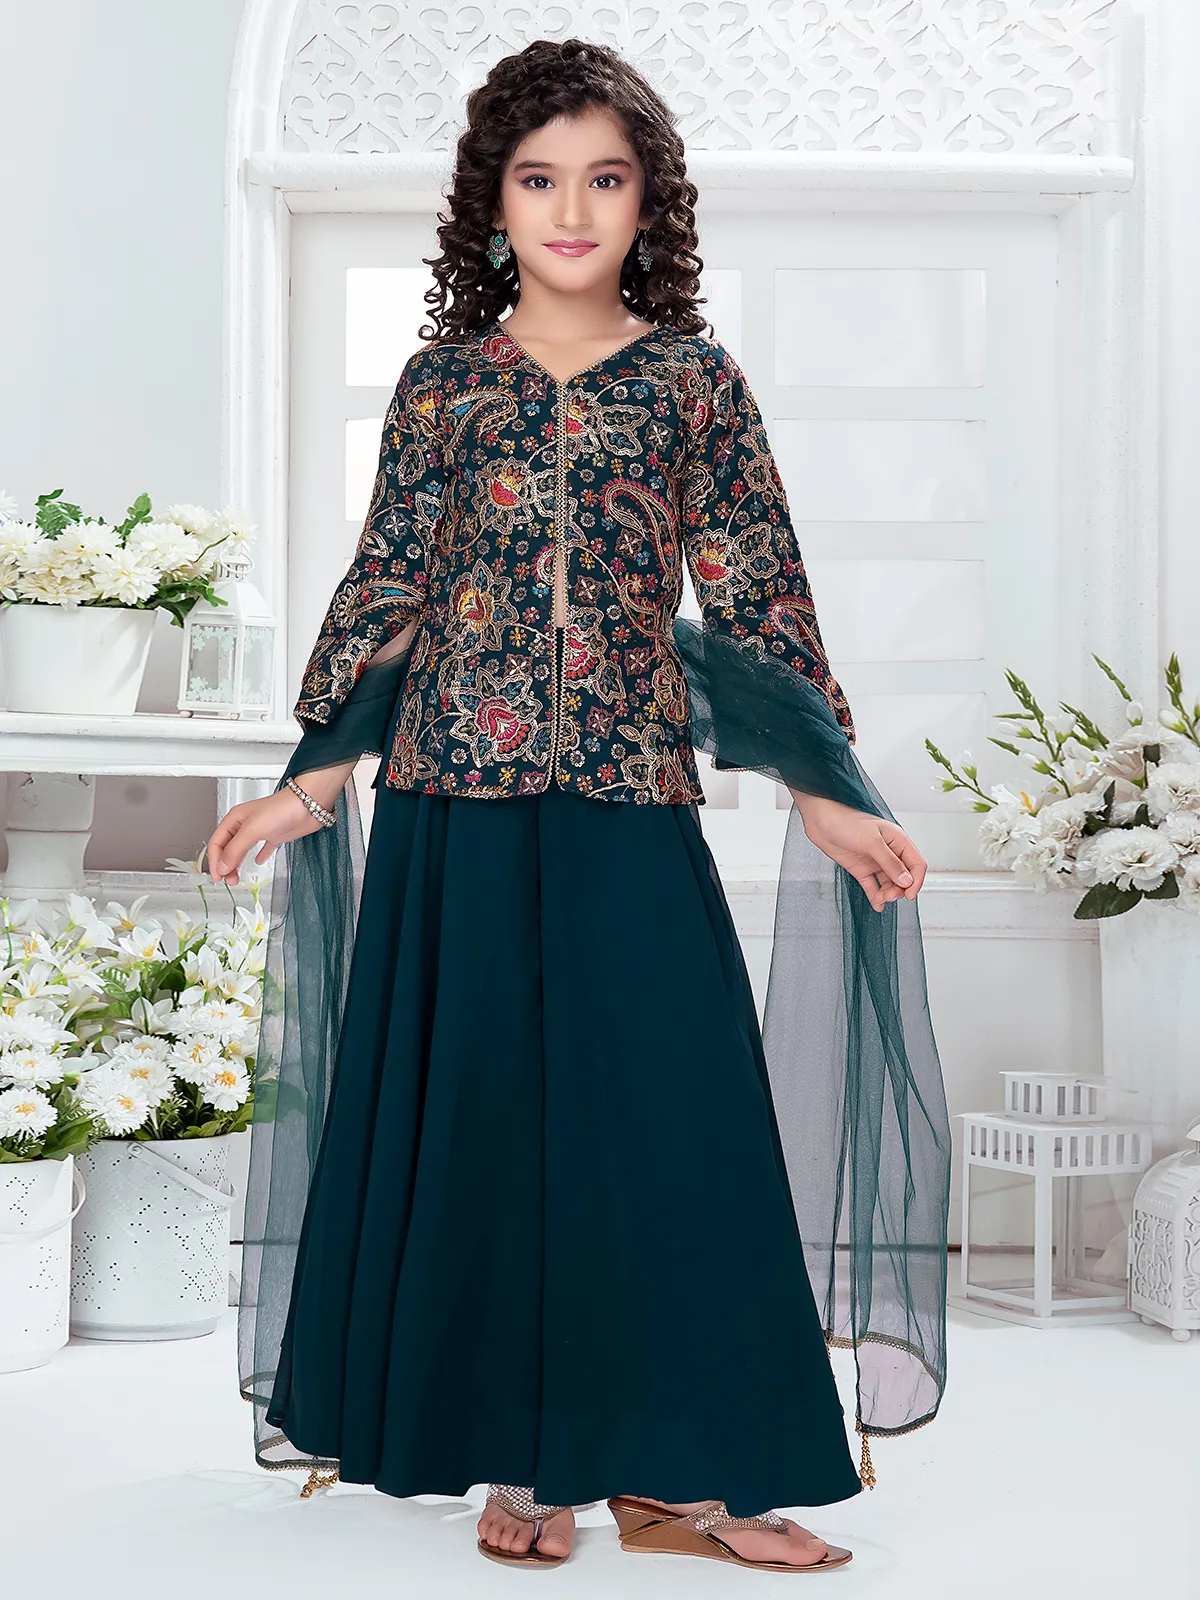 Stunning teal green georgette palazzo suit